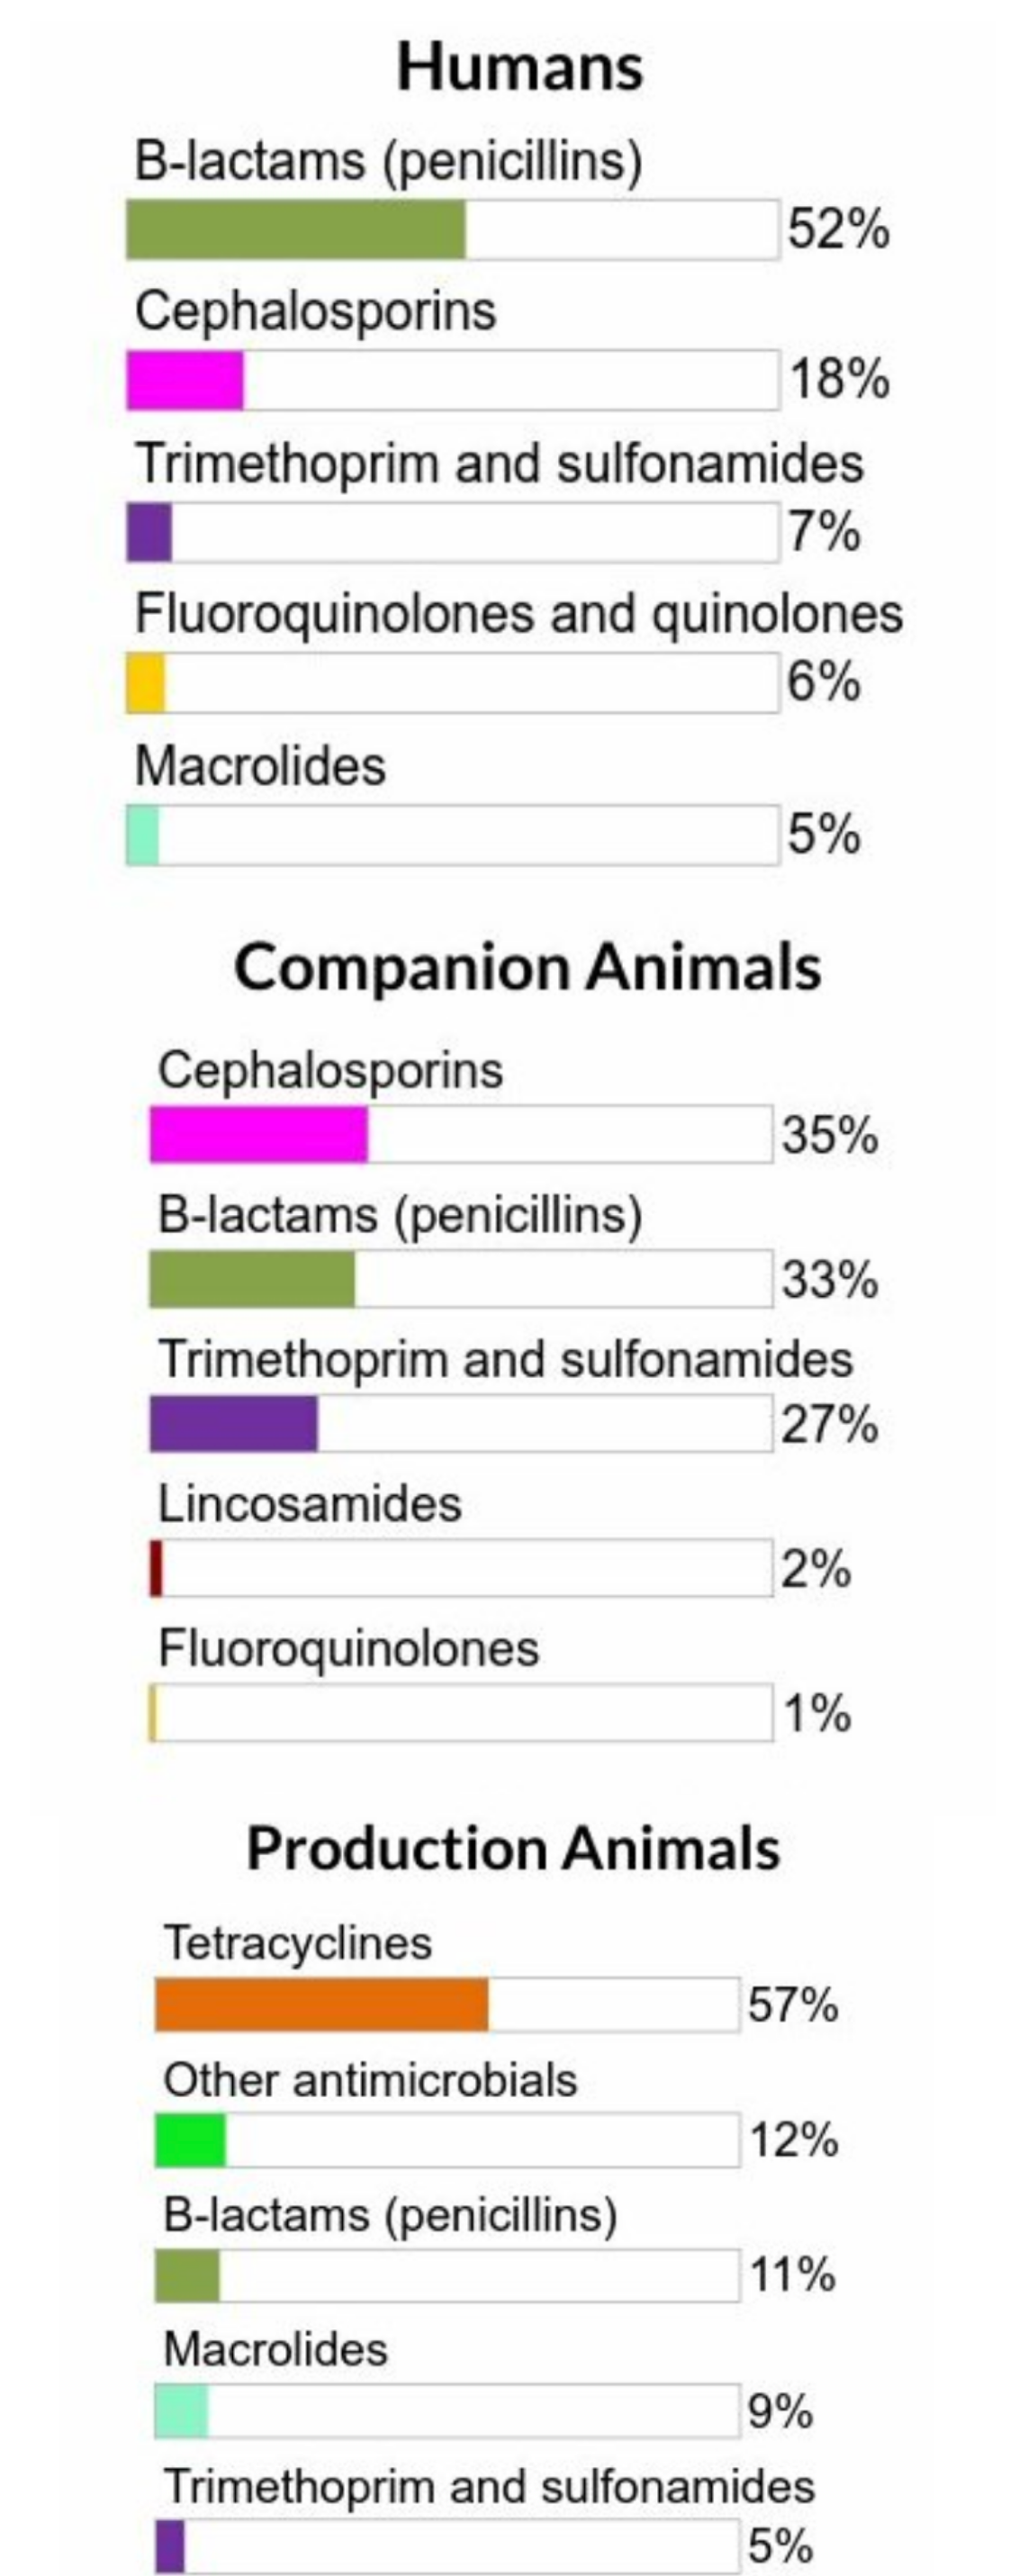 Figure 3. The proportions of total kilograms of antimicrobial classes distributed or sold in 2018 in humans, production animals, and companion animals. Text description follows.